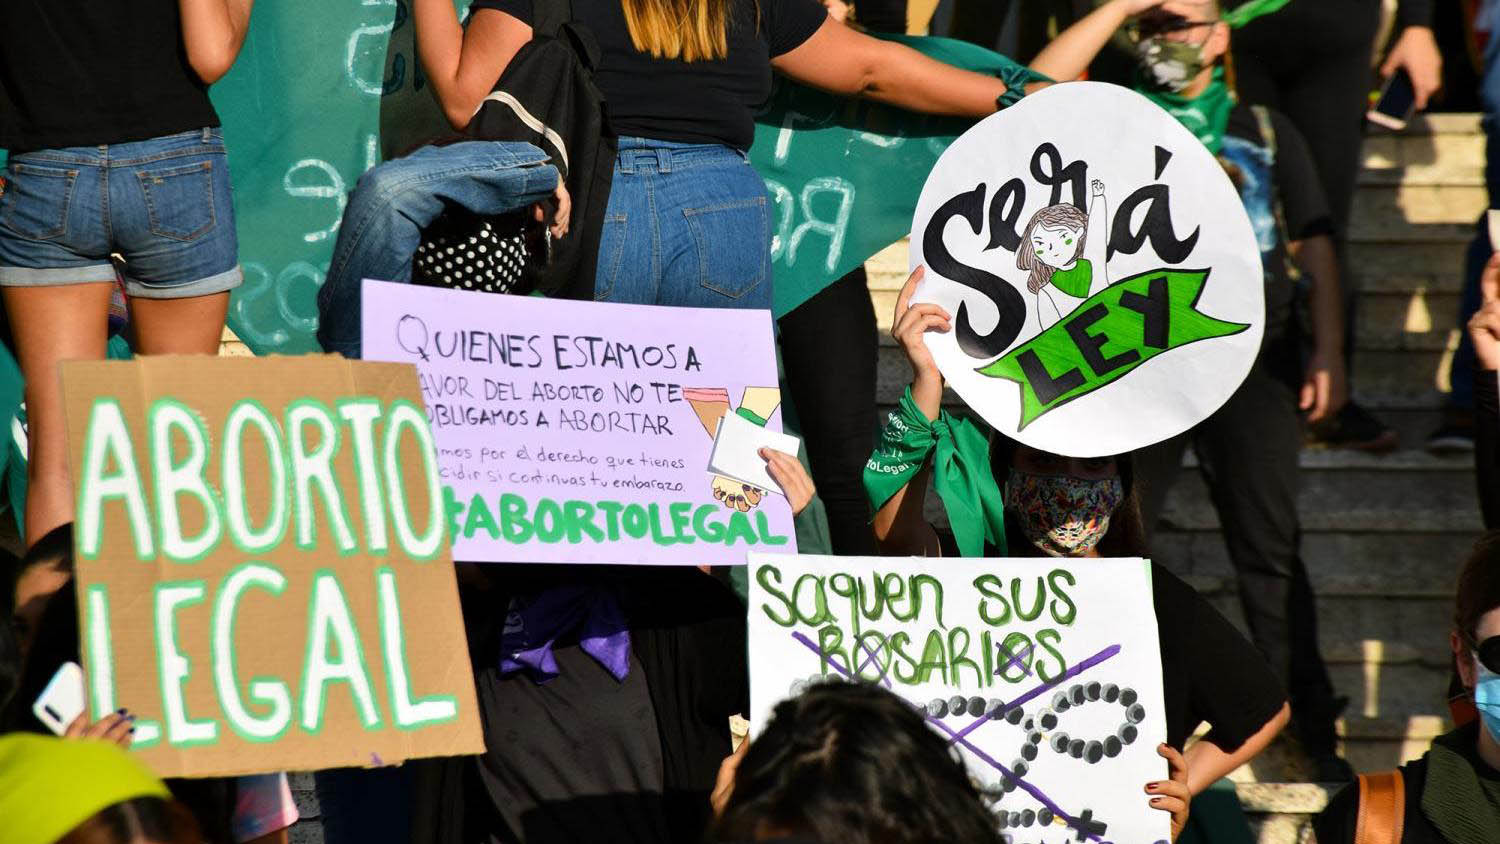 Protesters hold up signs supporting the right to abortion in Hermosillo, Sonora during a march on Sept. 28, 2020.